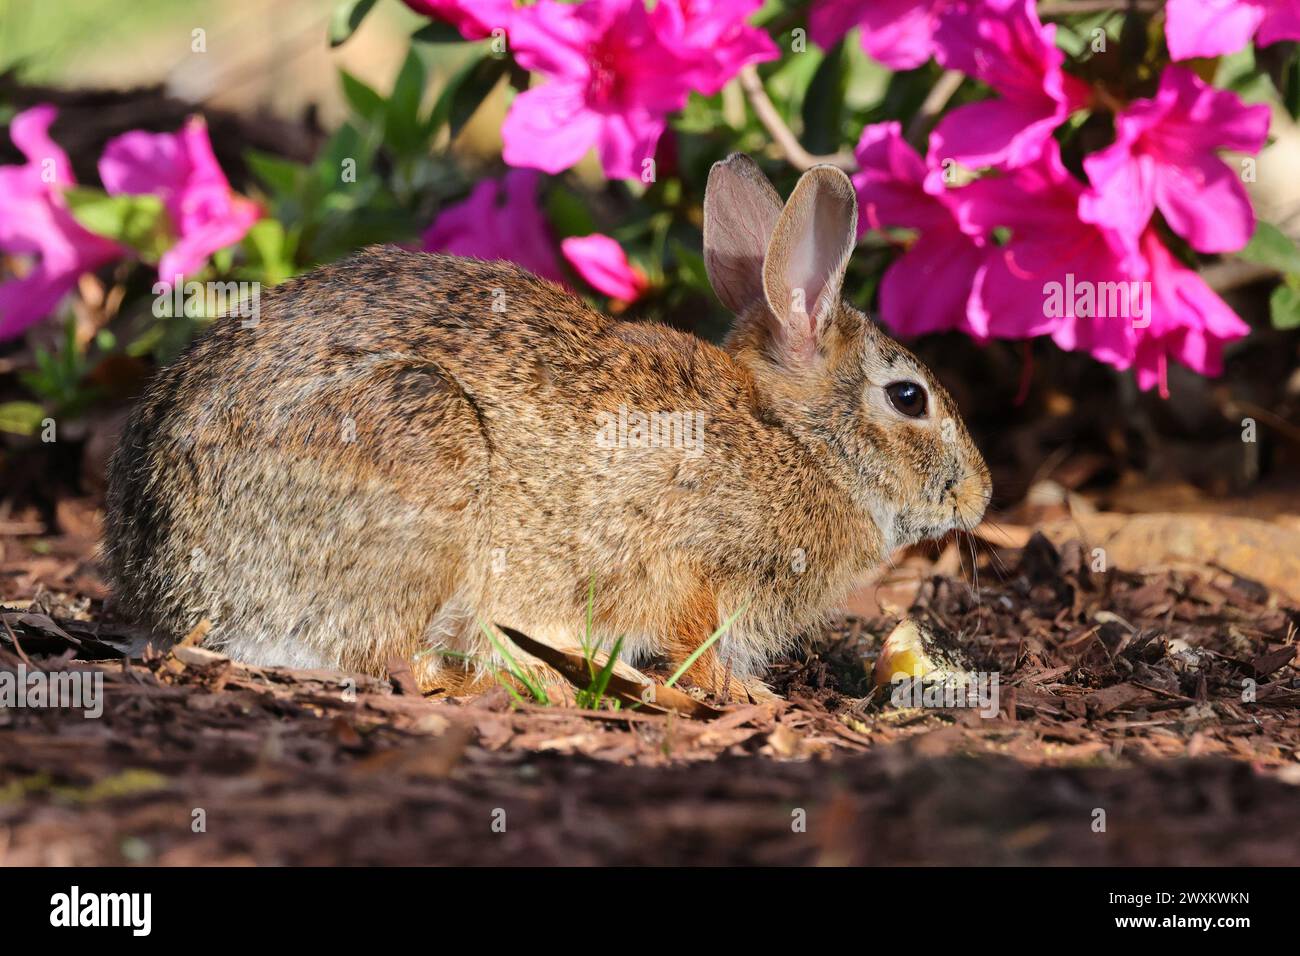 A rabbit resting beside flowers and grass on the ground Stock Photo